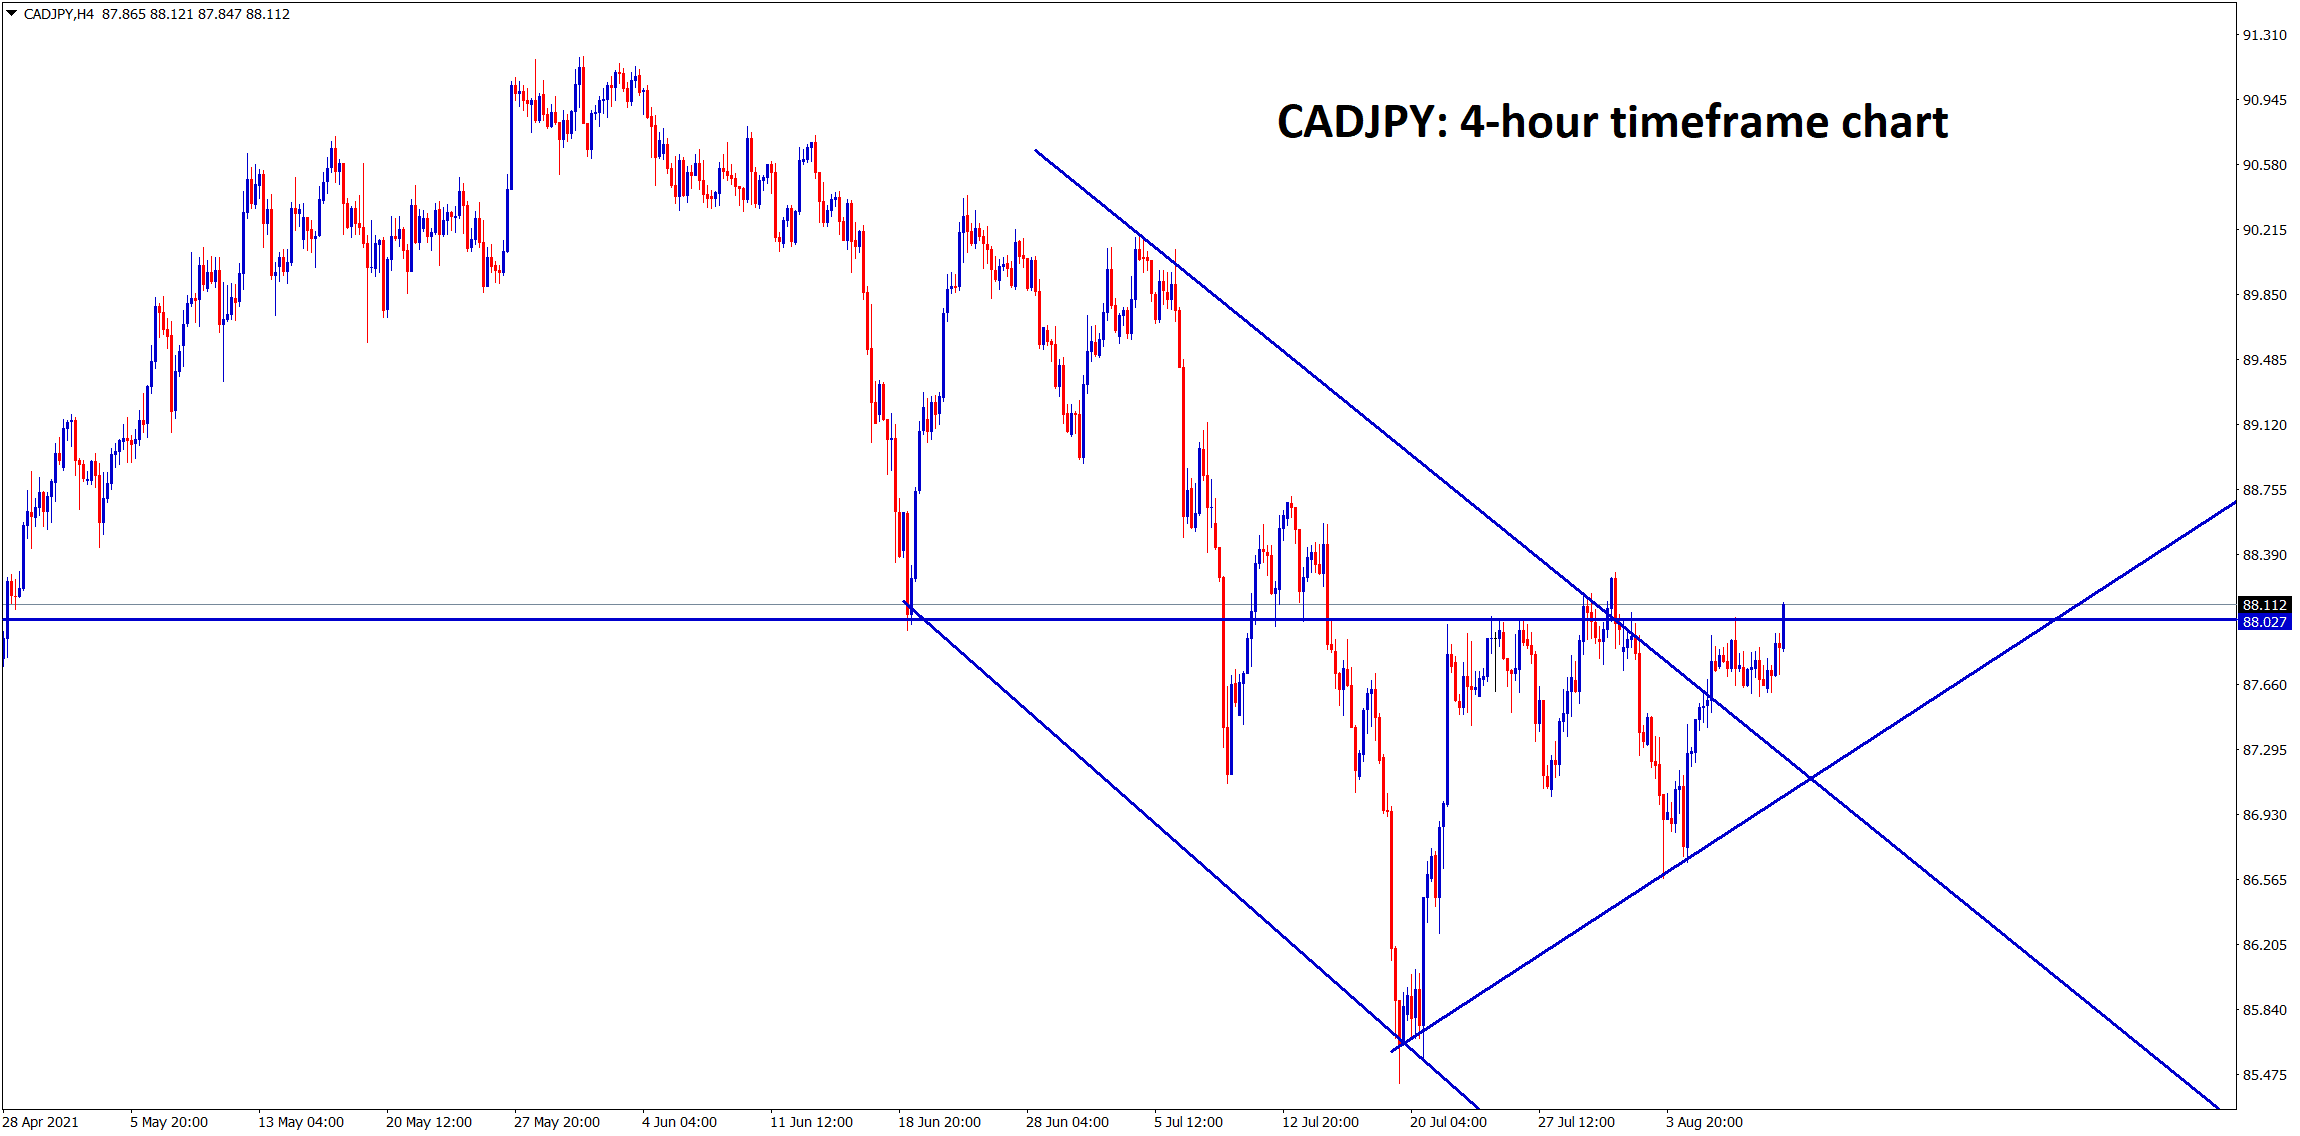 CADJPY continues to move up after breaking the descending channel and it has formed an Ascending Triangle pattern